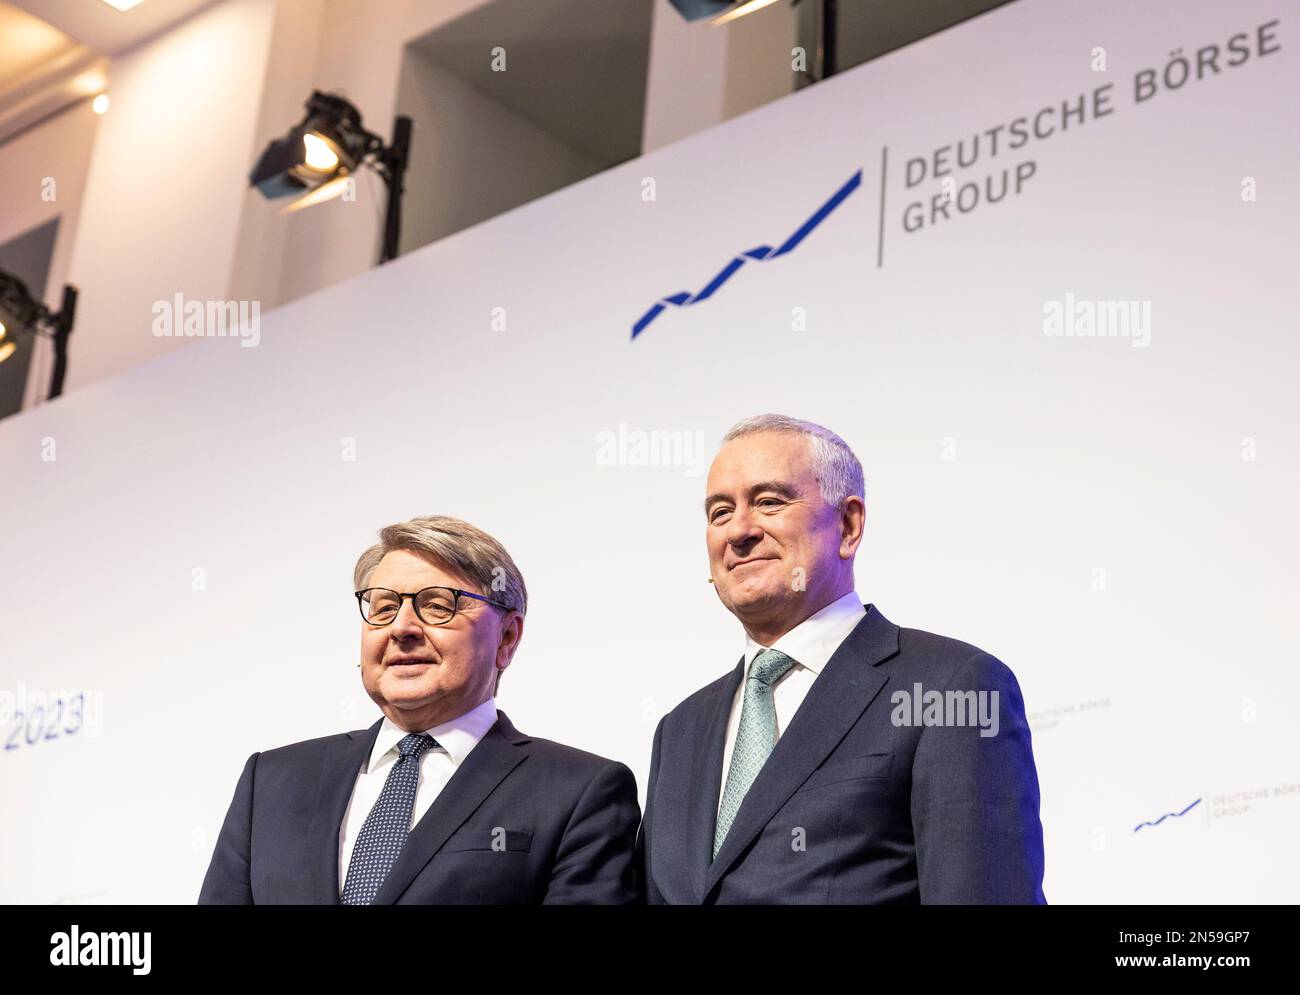 09 February 2023, Hesse, Frankfurt/Main: Theodor Weimer (l), Chairman of the Executive Board of Deutsche Börse AG, and Gregor Pottmeyer, Executive Board member of Deutsche Börse AG, stand together shortly before the start of the press conference. Deutsche Börse Group presents its figures for the financial year 2022 at the annual press conference. Photo: Hannes P. Albert/dpa Stock Photo